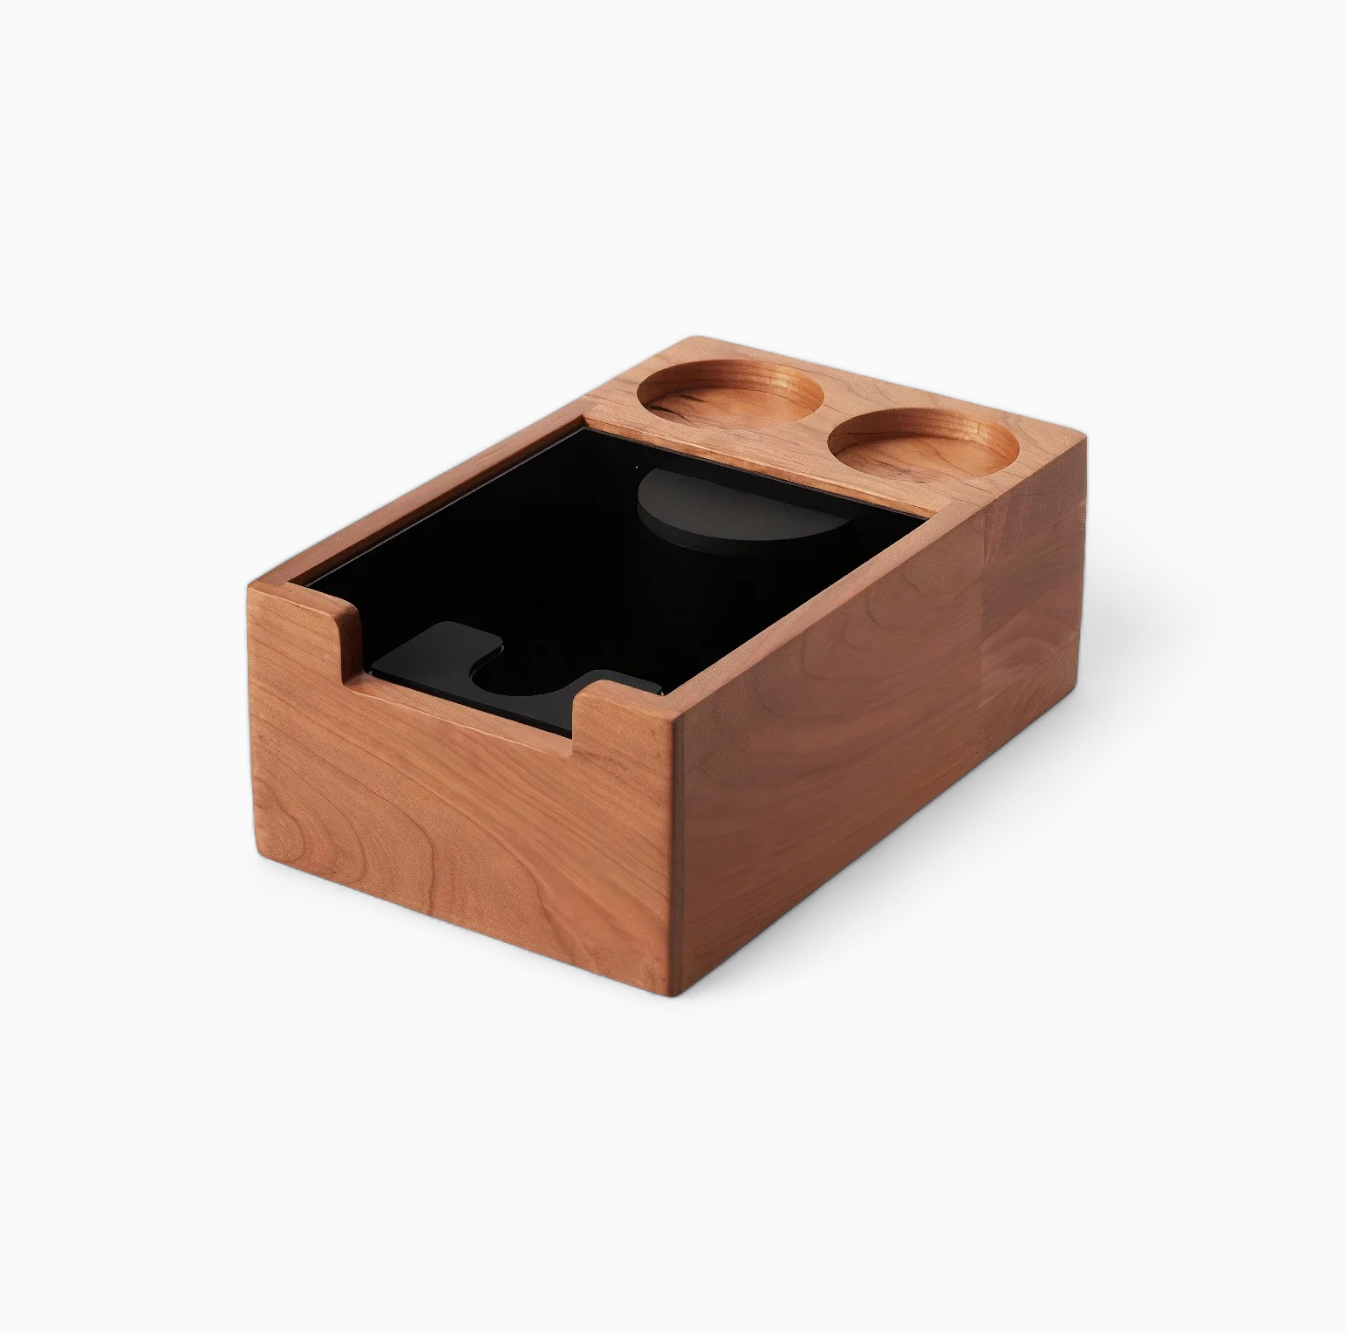 Portable Tamping Station With Knock Box For Espresso